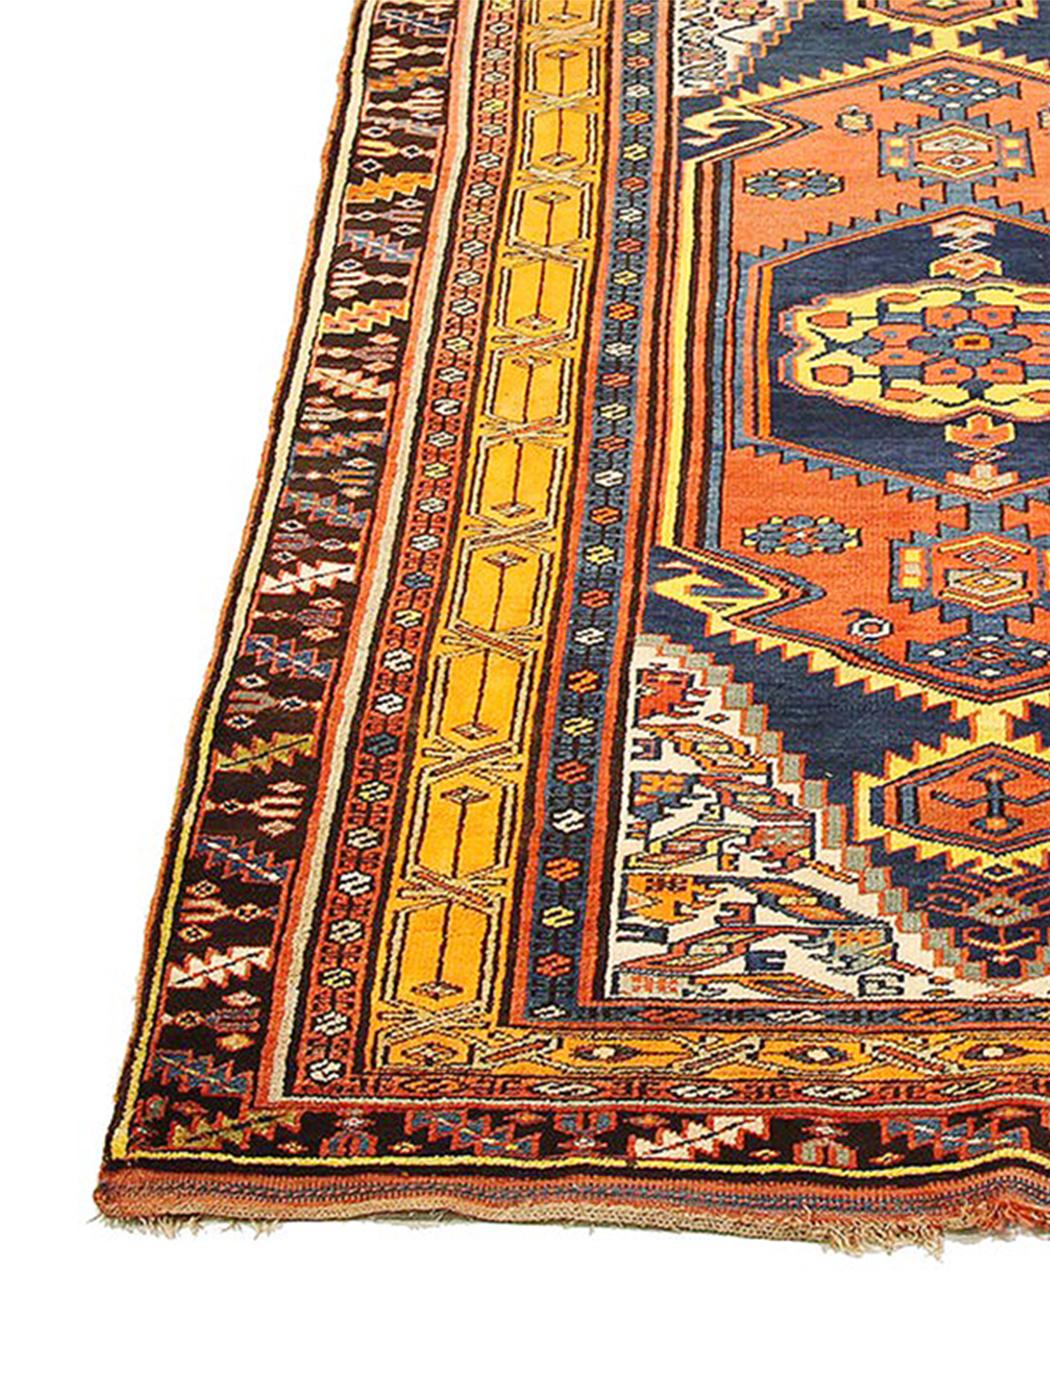 Antique Persian runner rug handwoven from the finest sheep’s wool and colored with all-natural vegetable dyes that are safe for humans and pets. It’s a traditional Bijar design featuring all-over rows of floral and geometric medallion details that